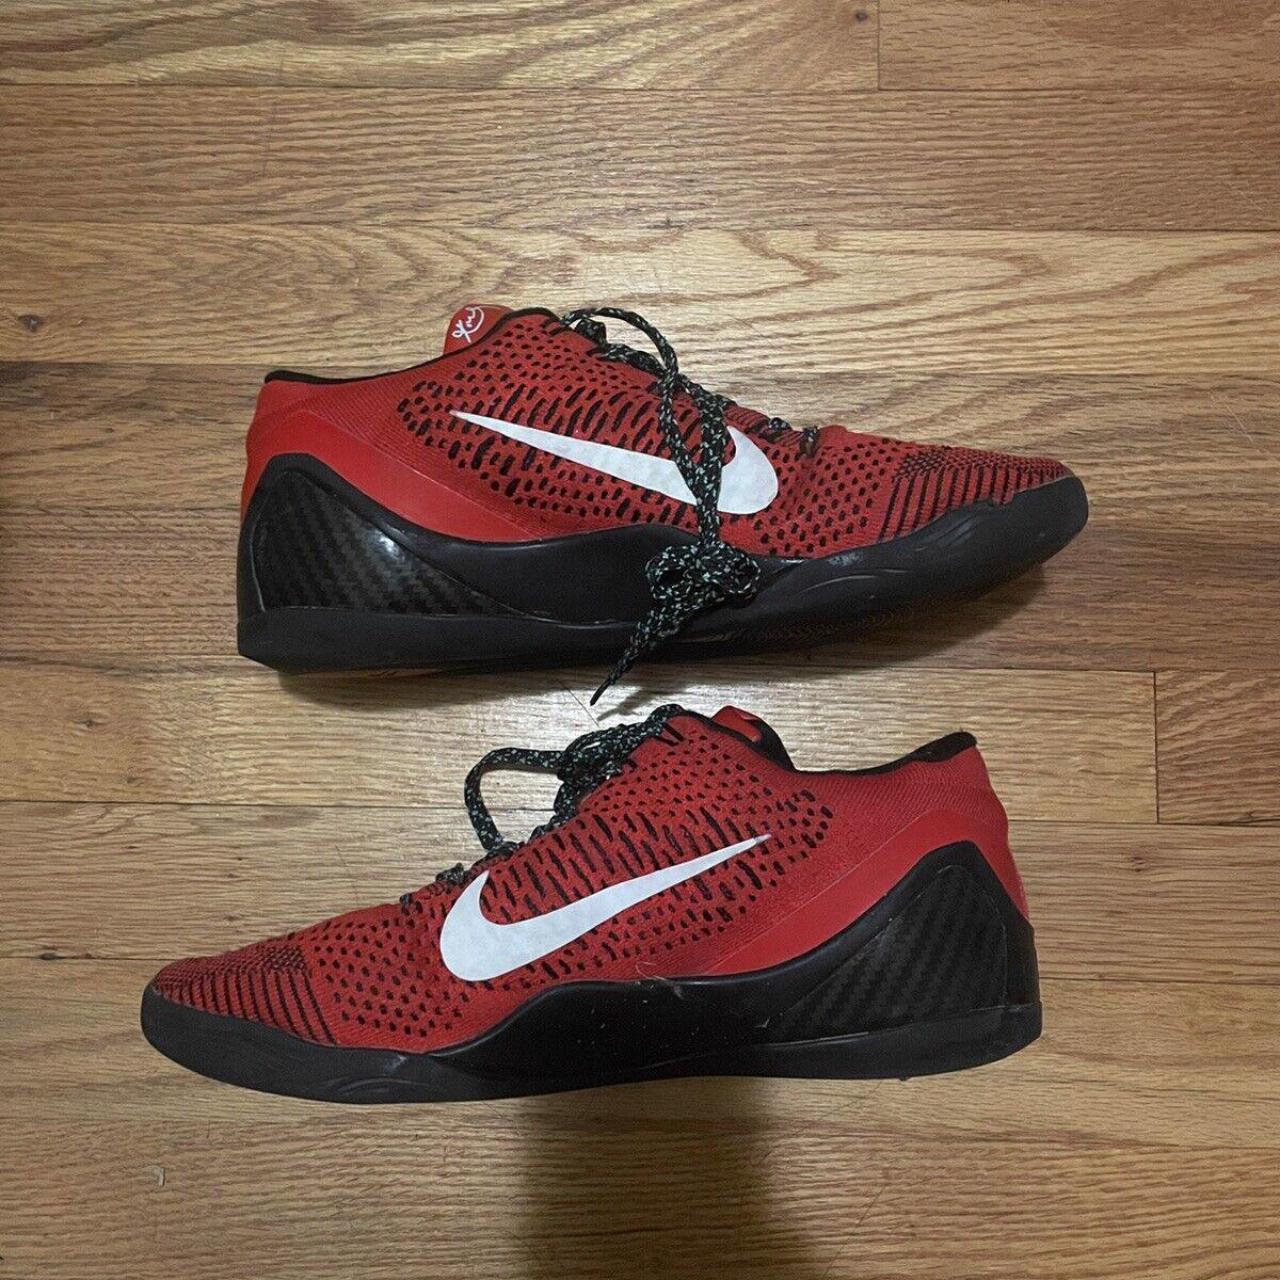 NIKE KOBE 11 ELITE LOW “USA” They are in insanely - Depop